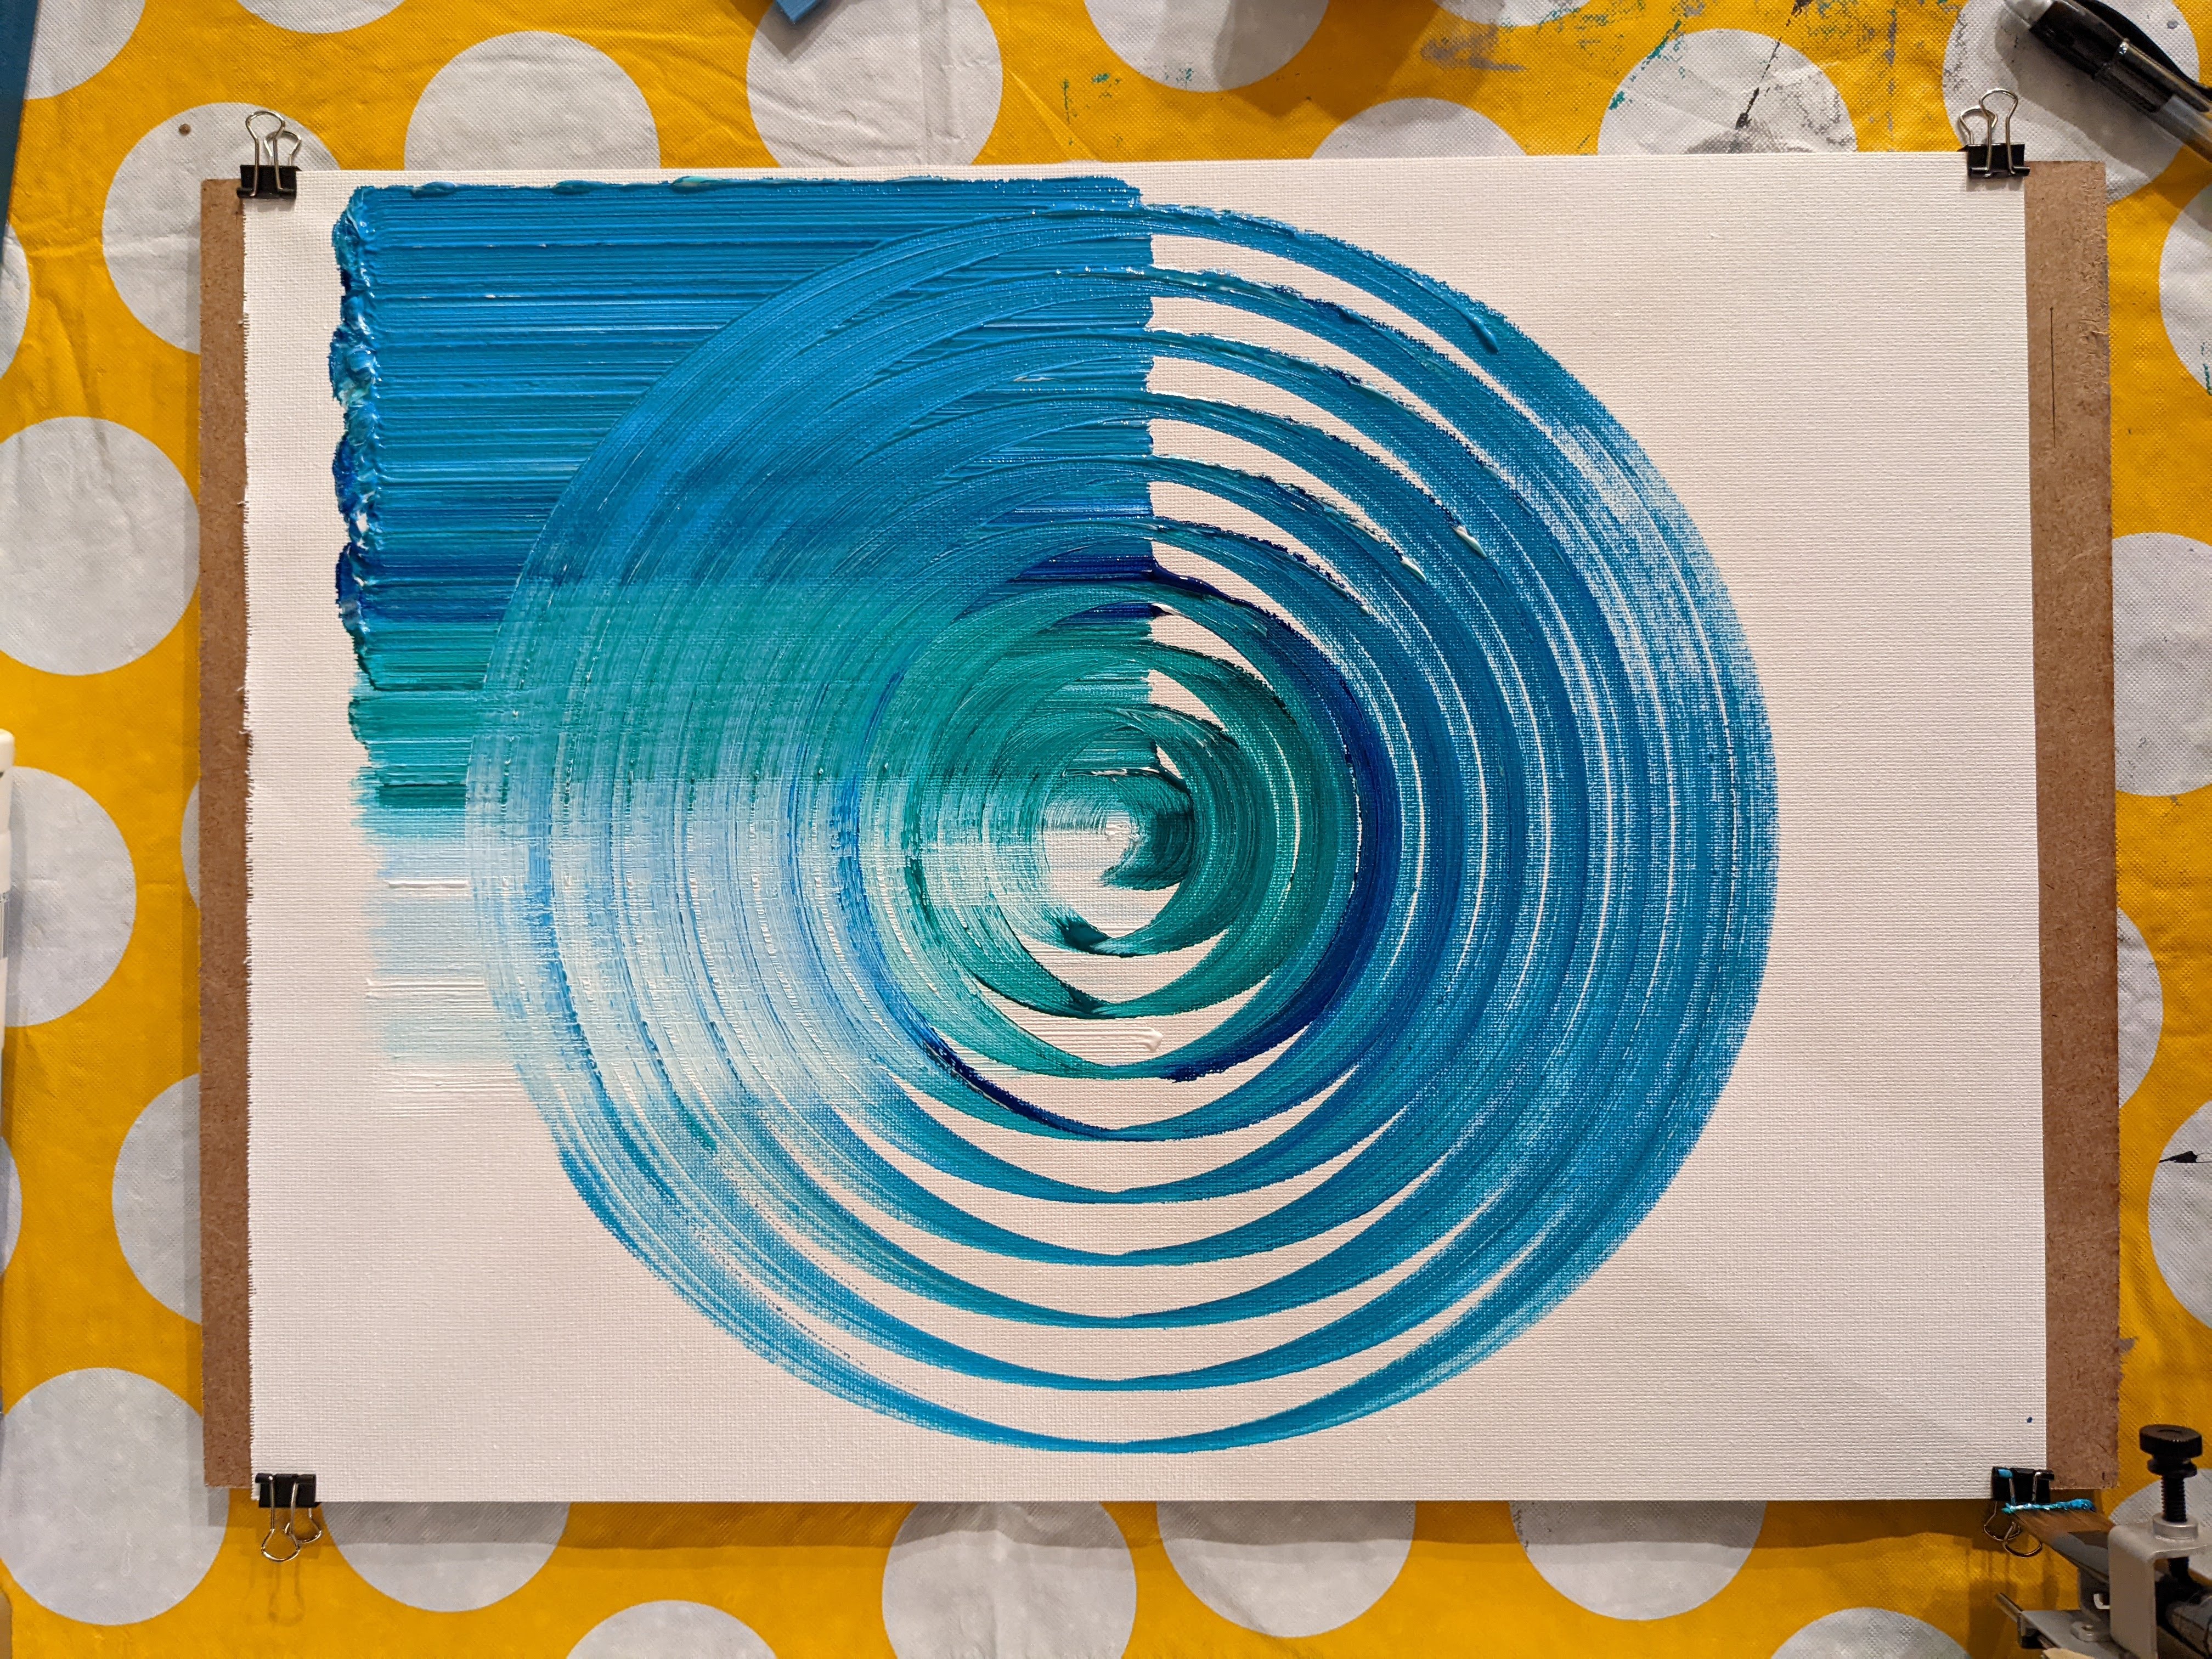 An image of a canvas with perfectly concentric circles and lines painted on it in blue and green.